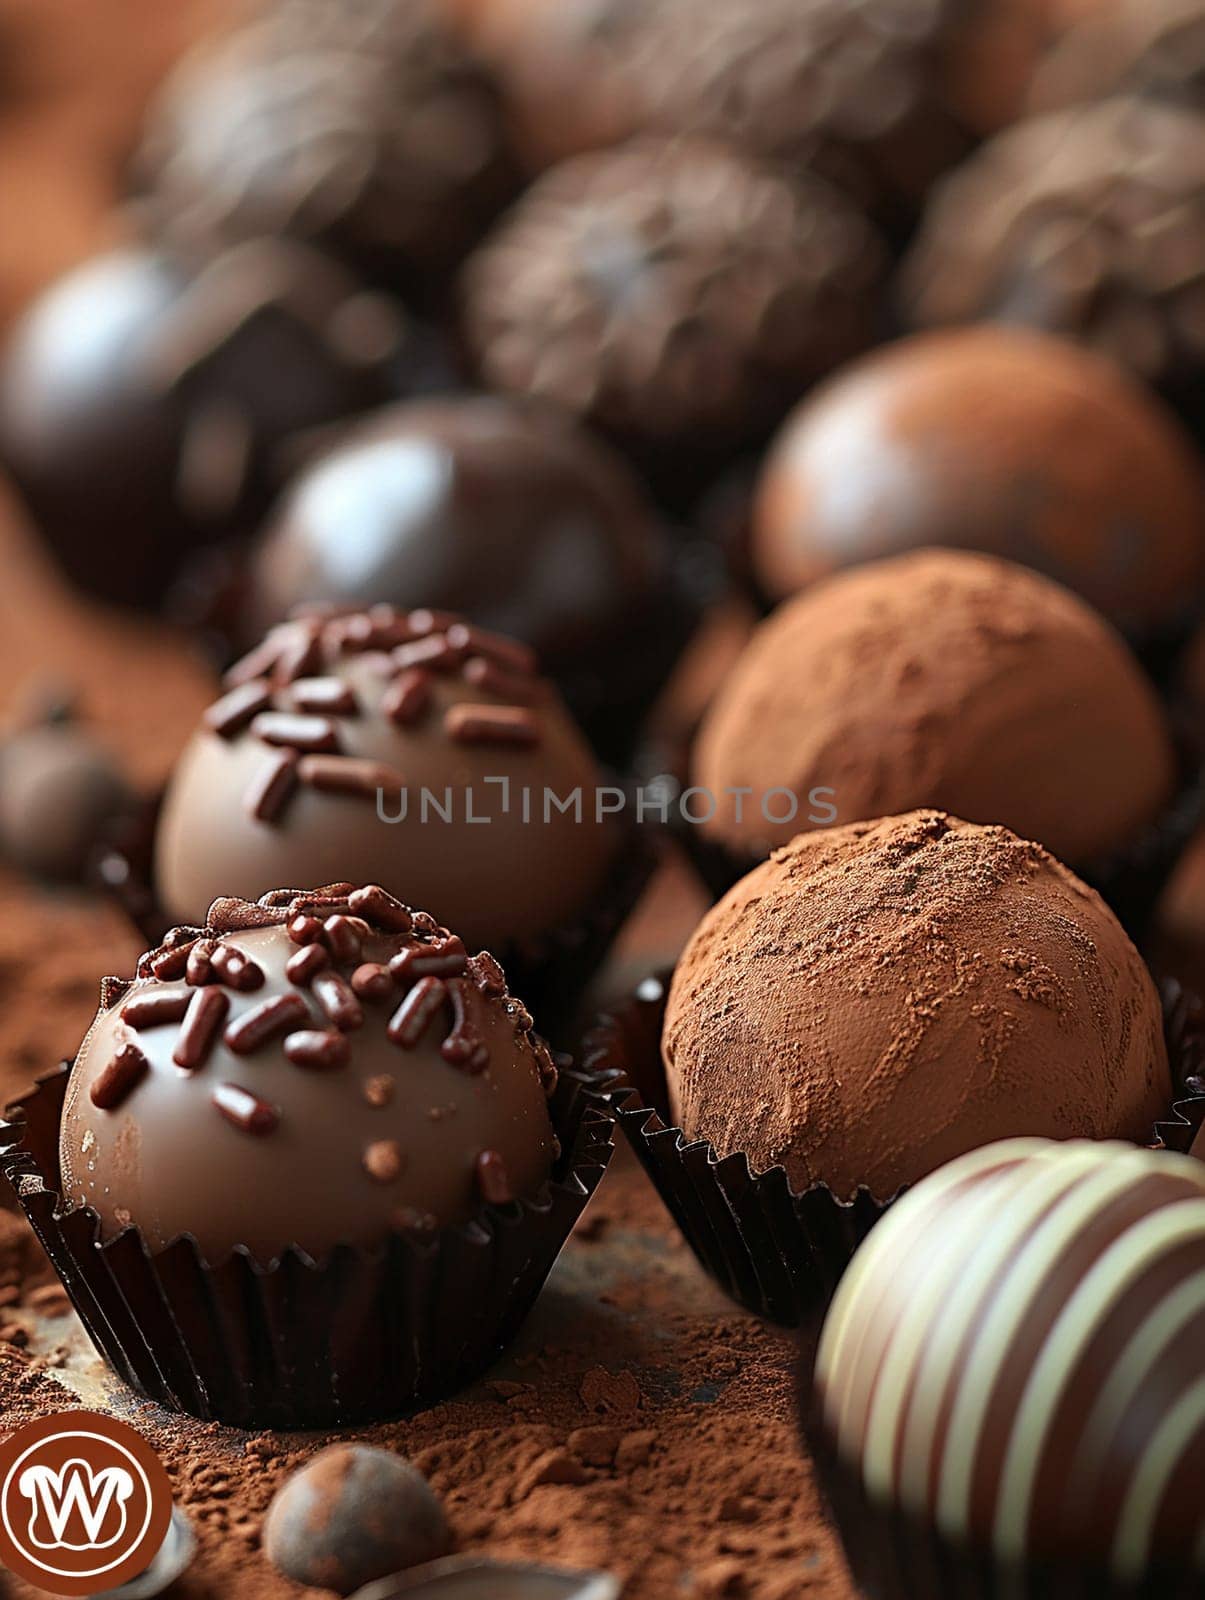 Artisanal Chocolate Truffles Melt Indulgence in Business of Confectionery, Molds and cocoa dust a scene of sweet artistry in the chocolate business.